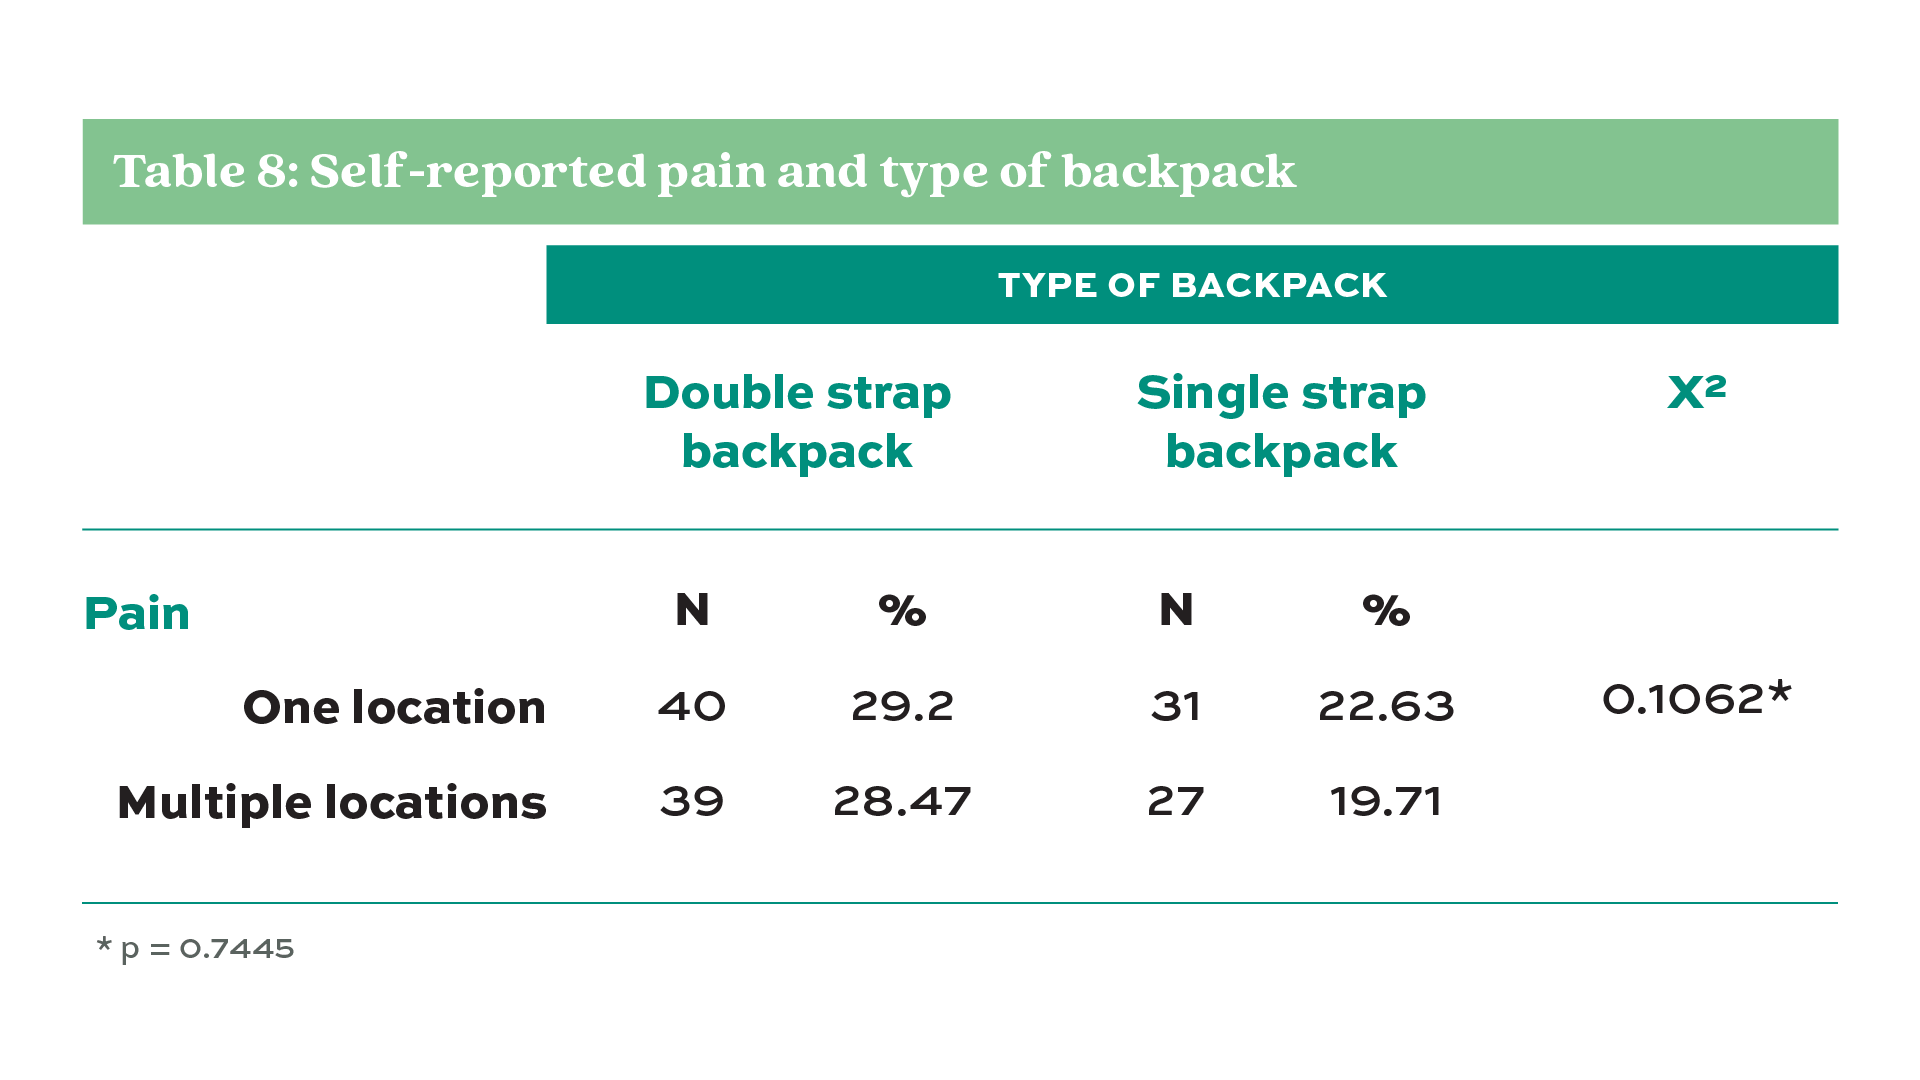 Table 8. Self-reported pain and type of backpack